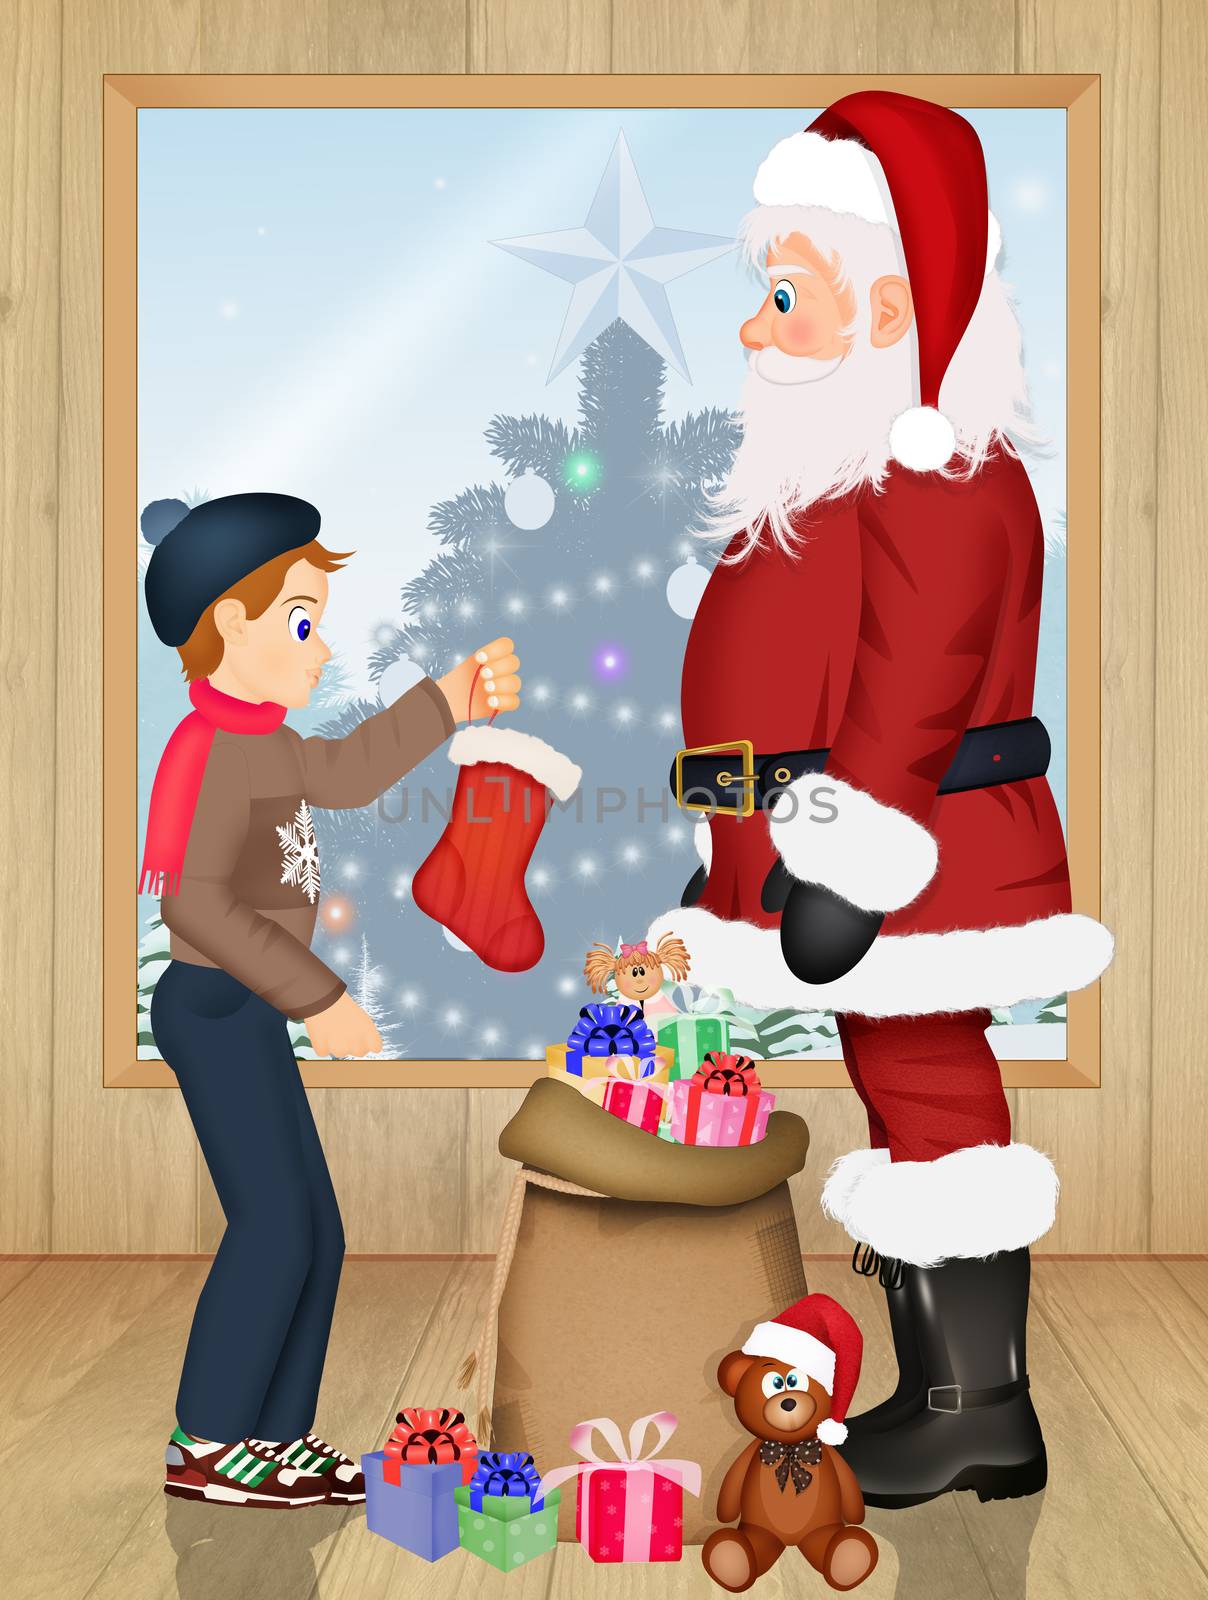 illustration of Santa Claus with sack of presents